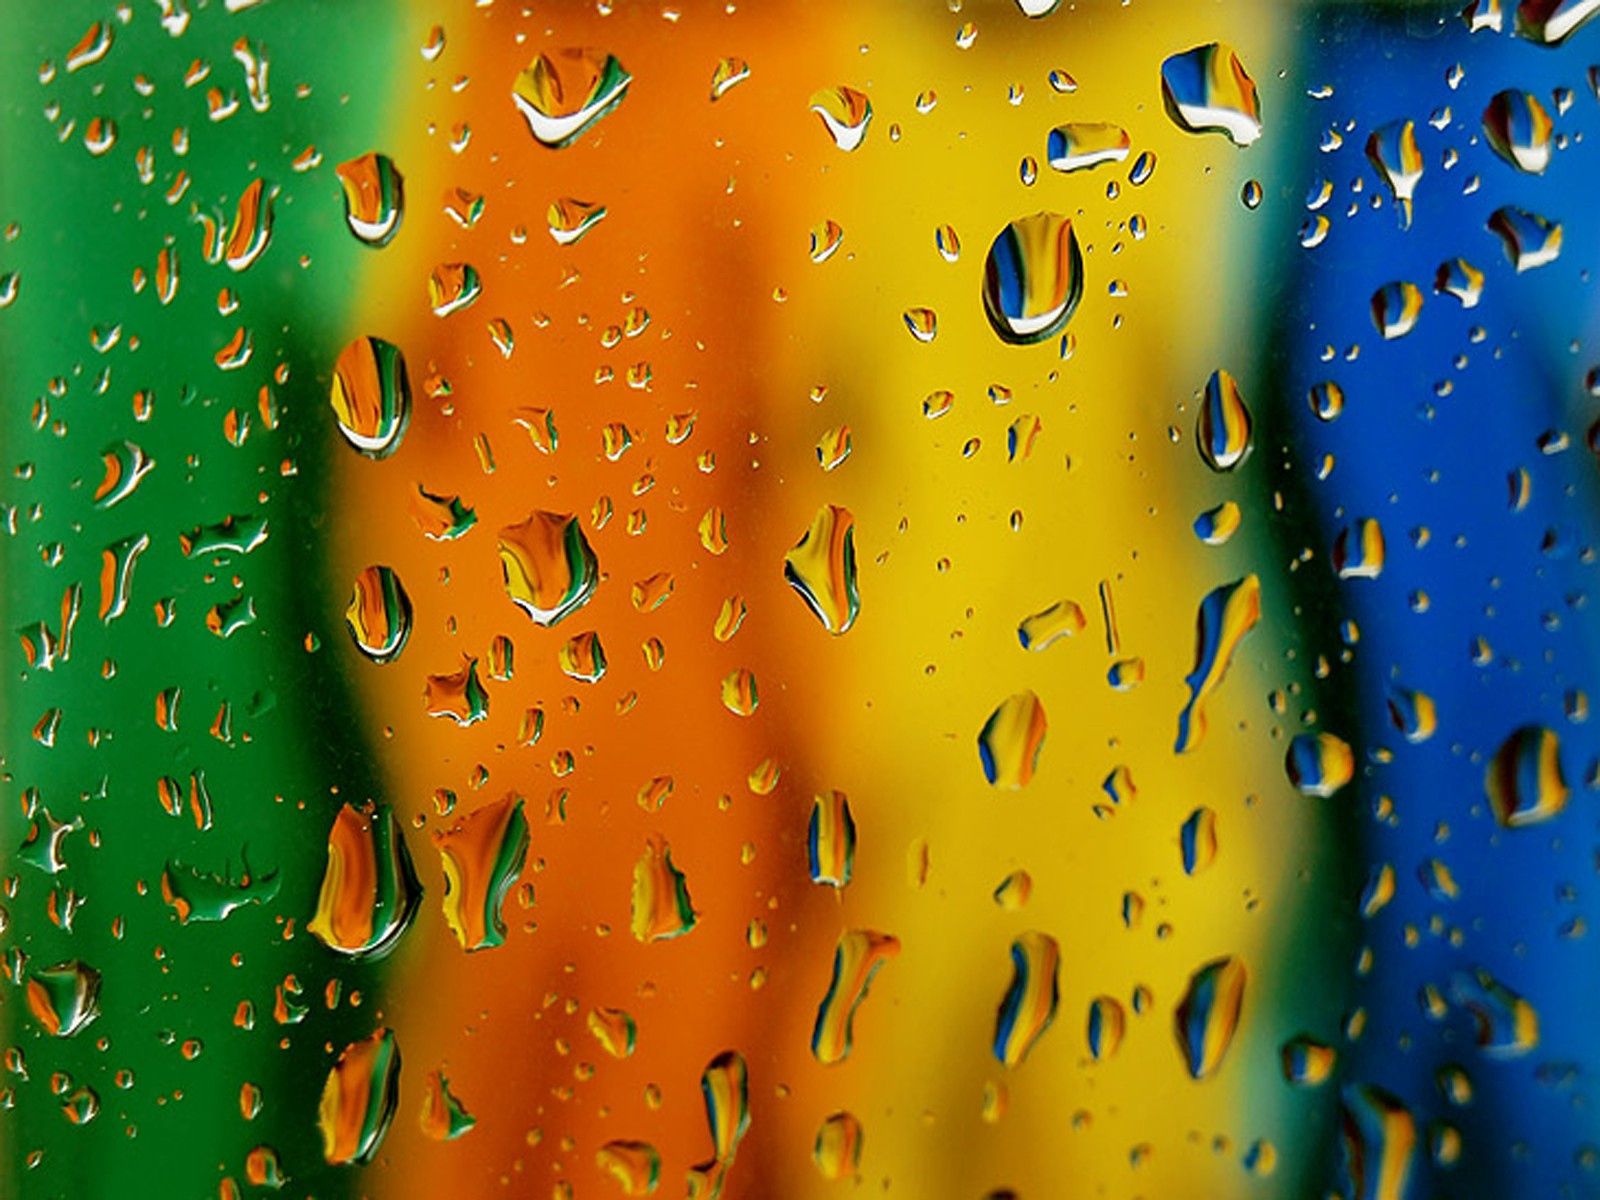 multicolored, drops, motley, texture, textures, surface